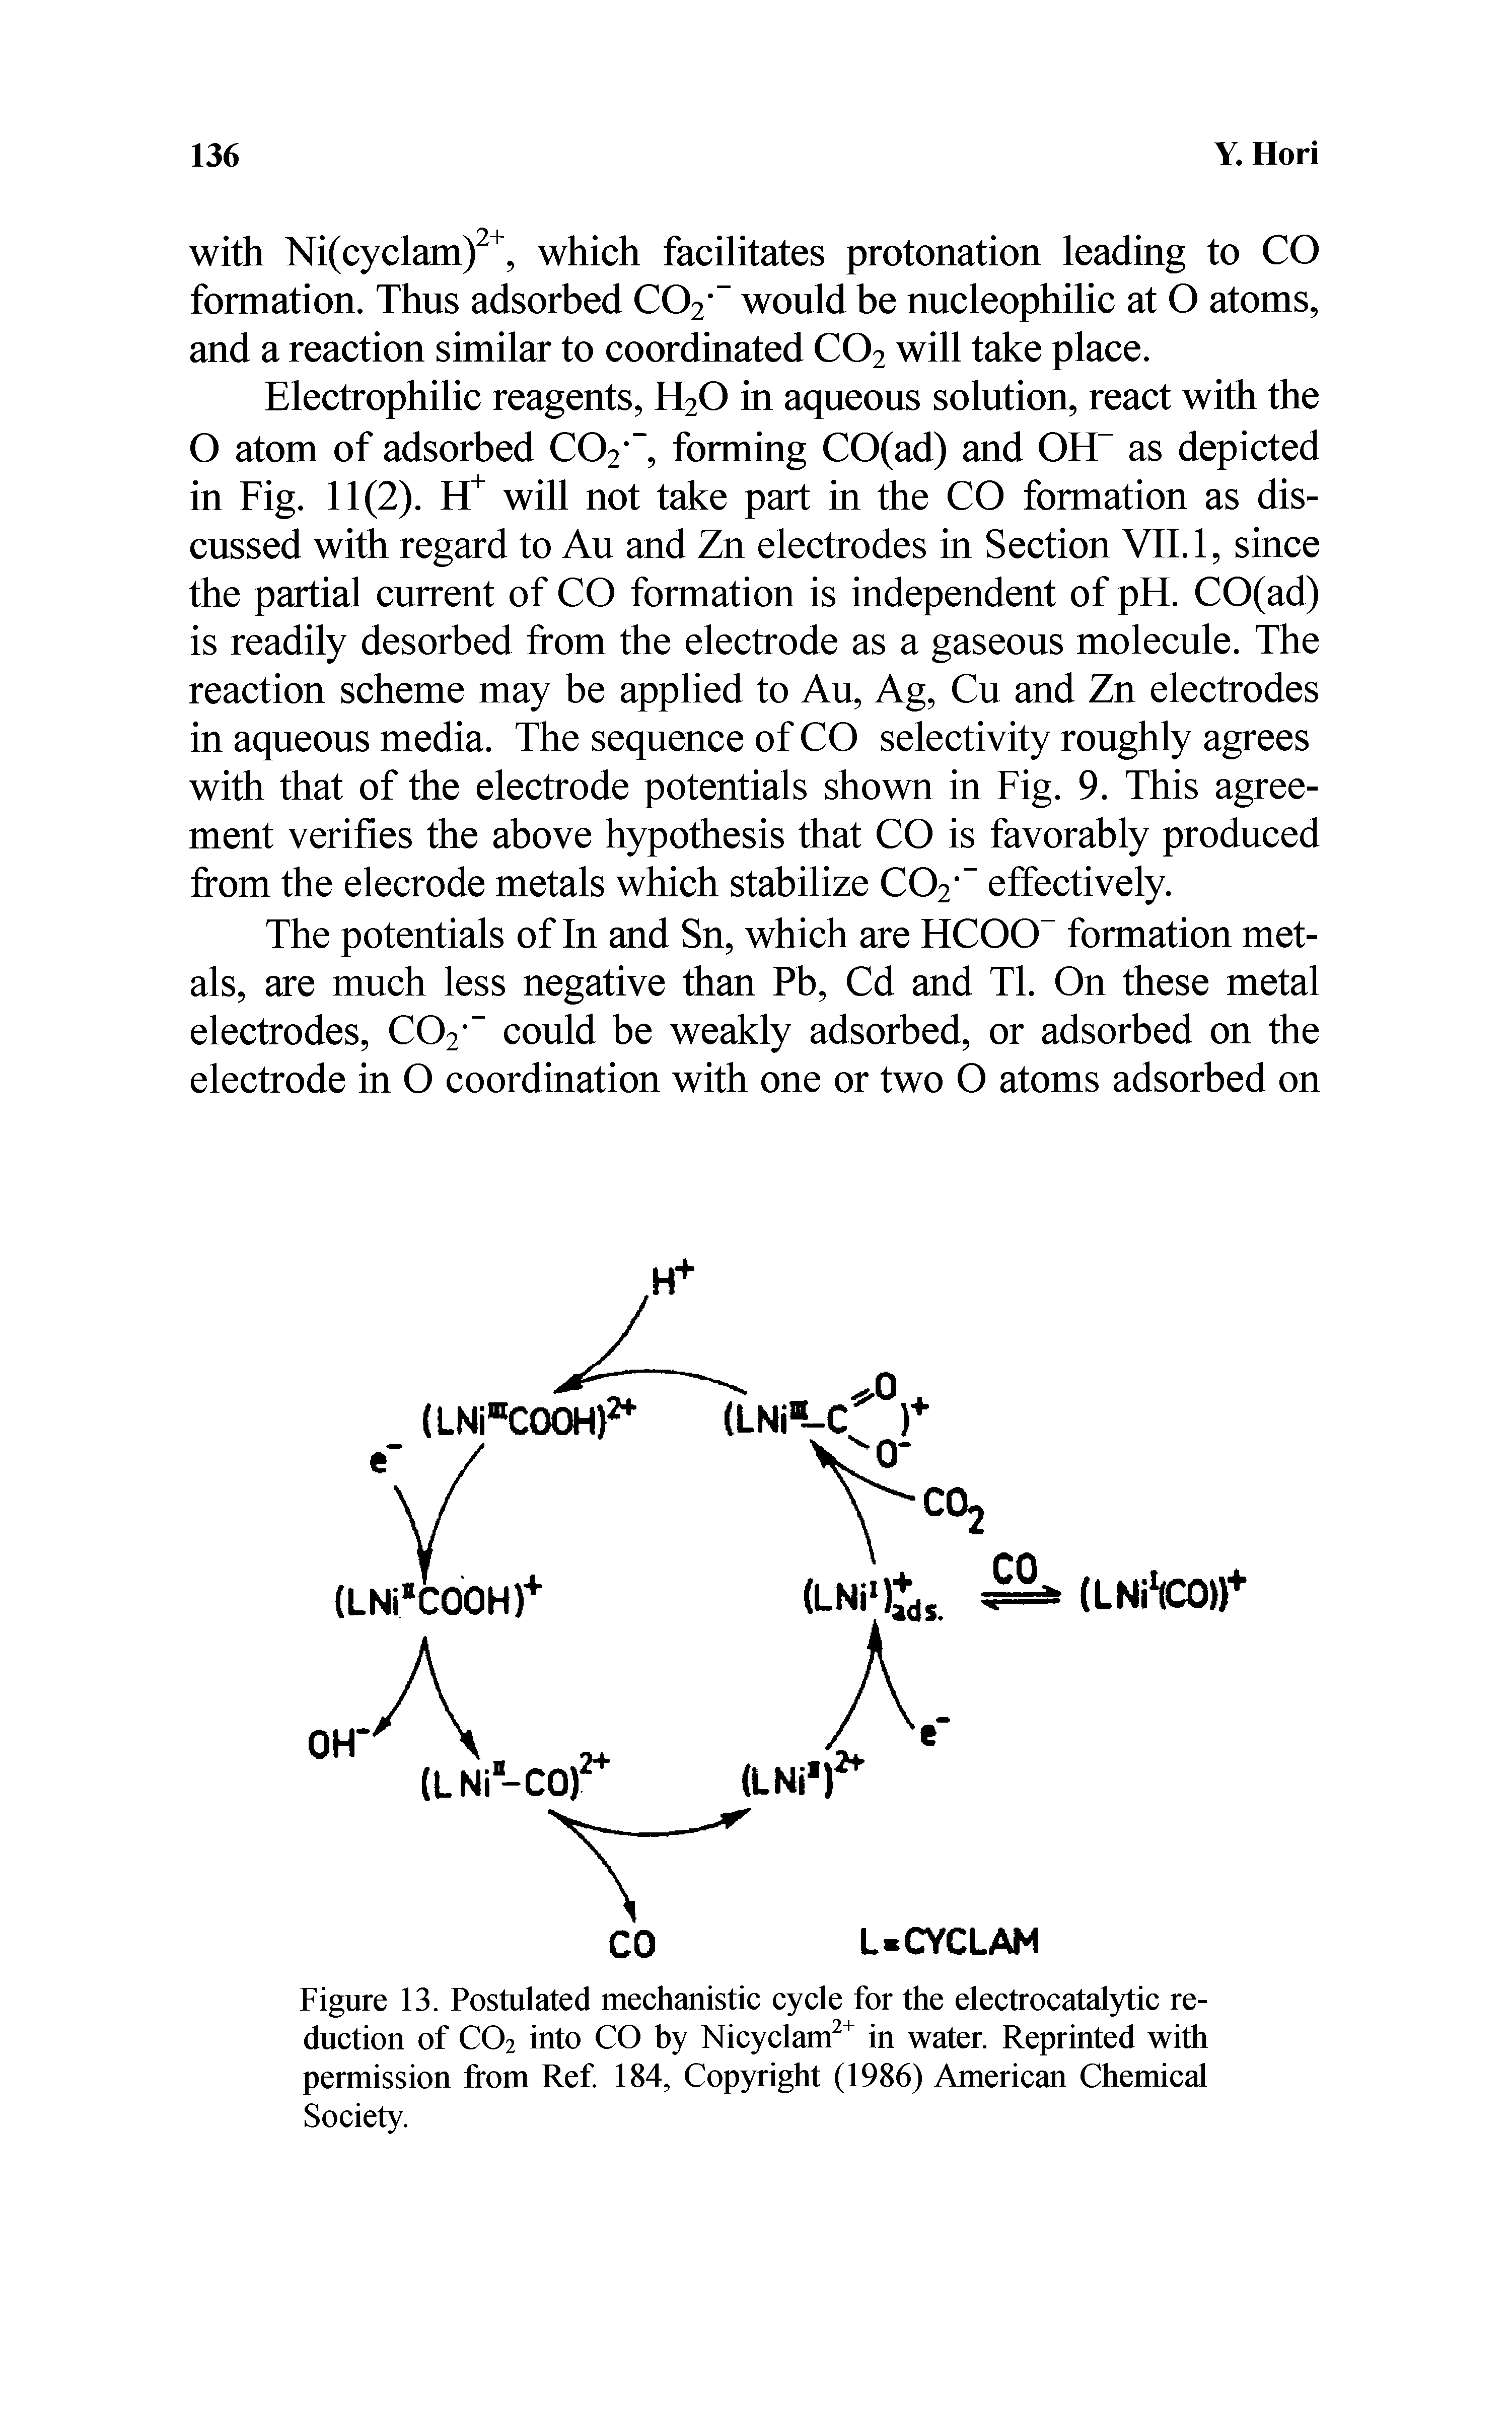 Figure 13. Postulated mechanistic cycle for the electrocatalytic reduction of CO2 into CO by Nicyclam in water. Reprinted with permission from Ref. 184, Copyright (1986) American Chemical Society.